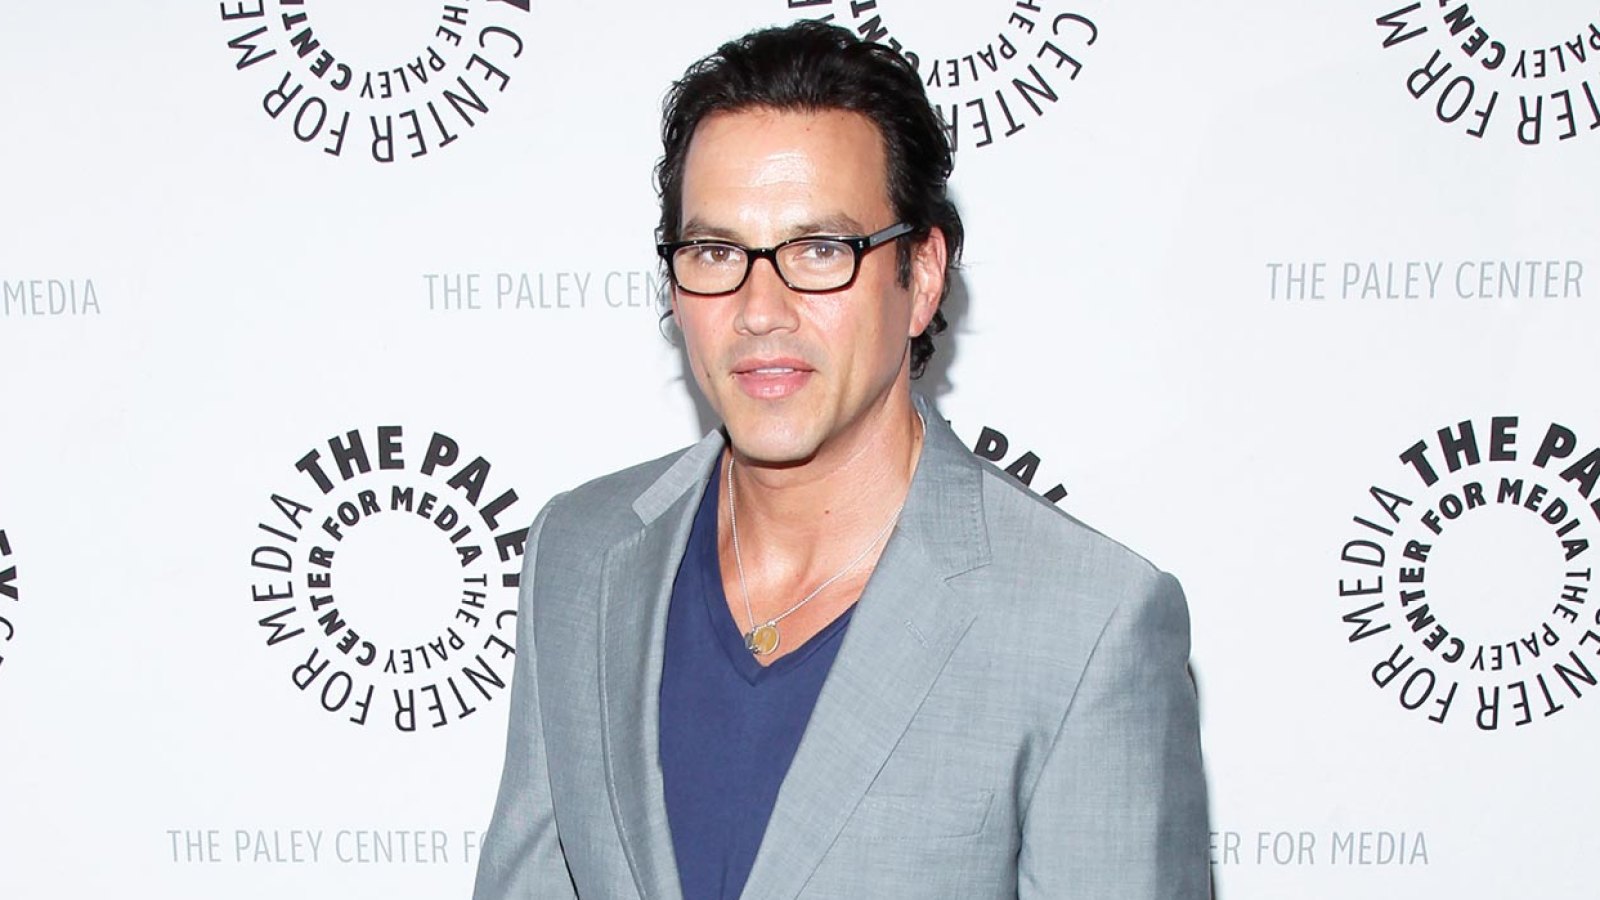 General Hospitals Tyler Christopher Cause of Death Revealed as Suffocation via Intoxication